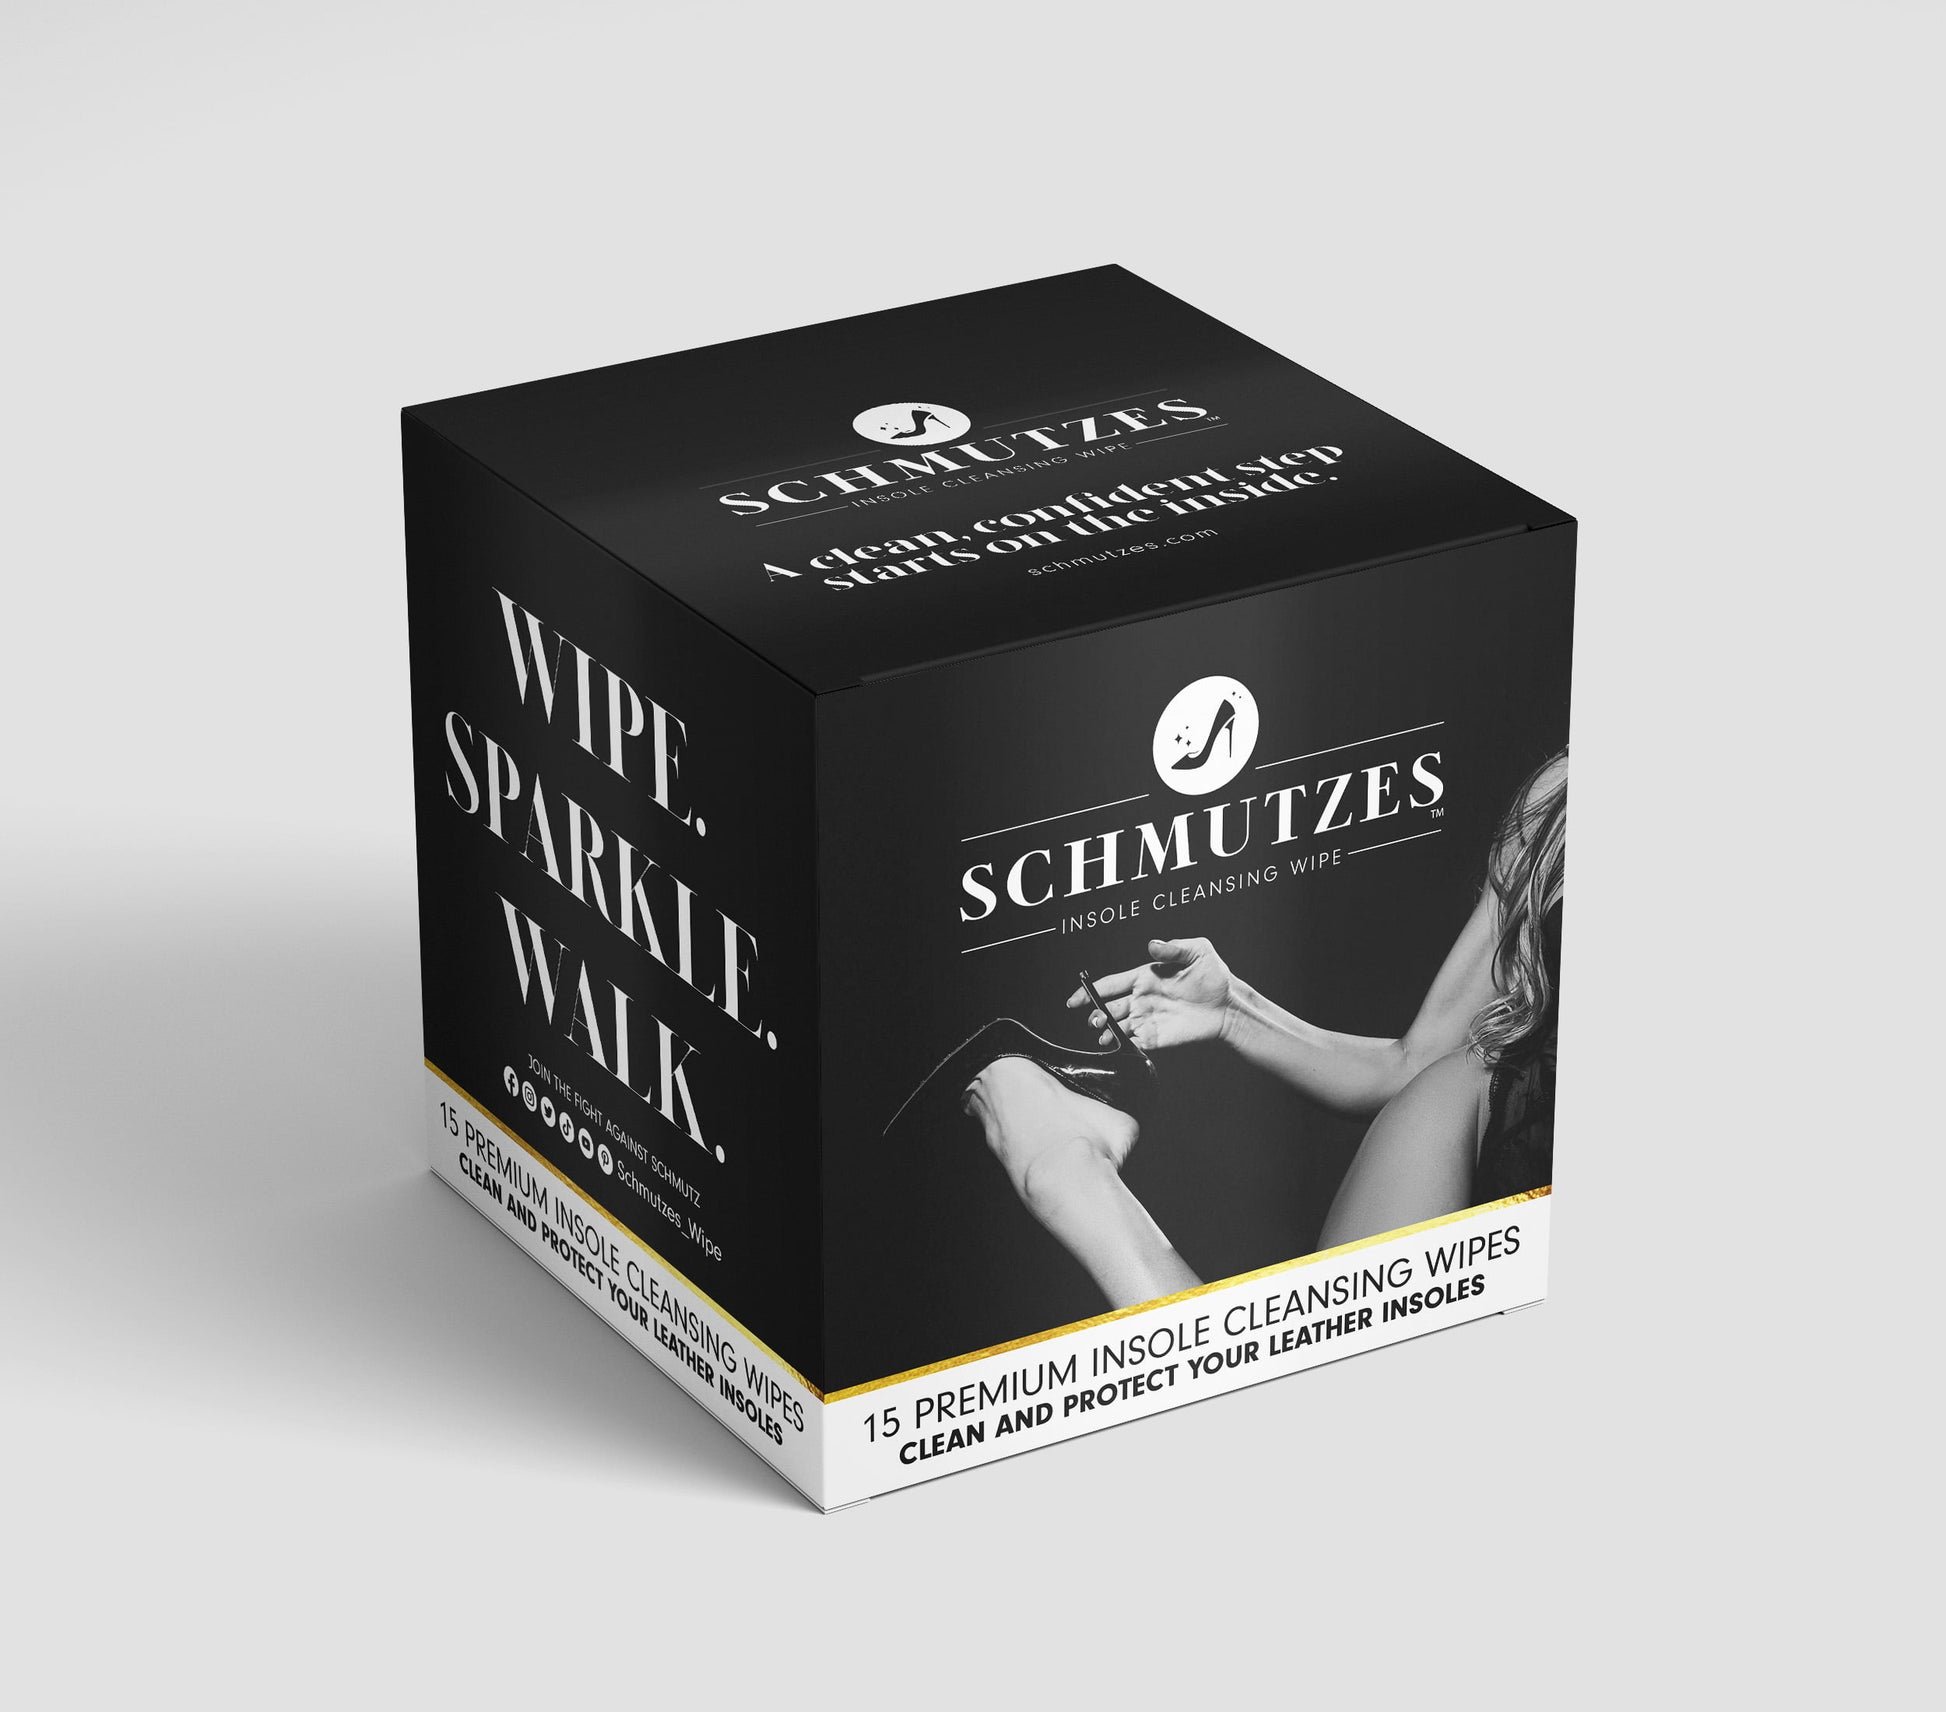 a black box with black and white text that says Schmutzes Insolce Cleansing Wipe